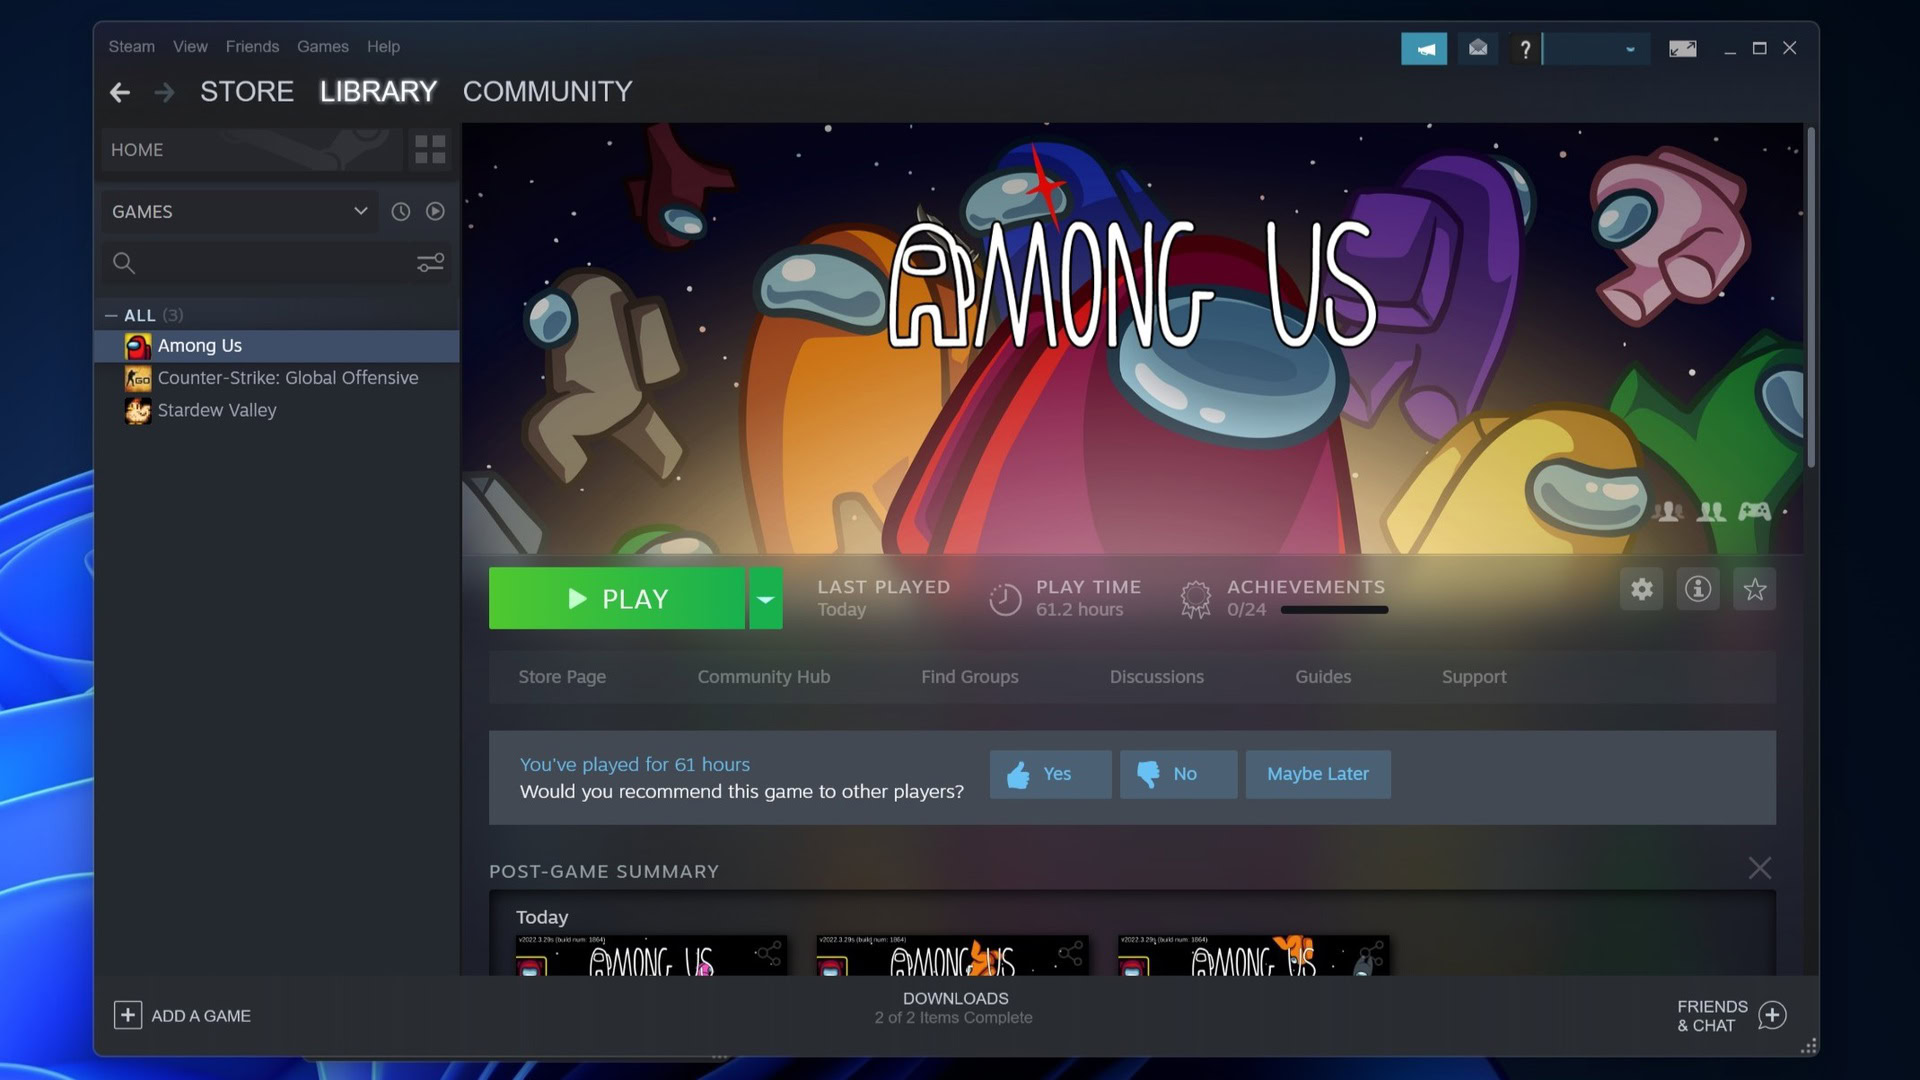 How to Finally Get Rid of Games From Your Steam Account